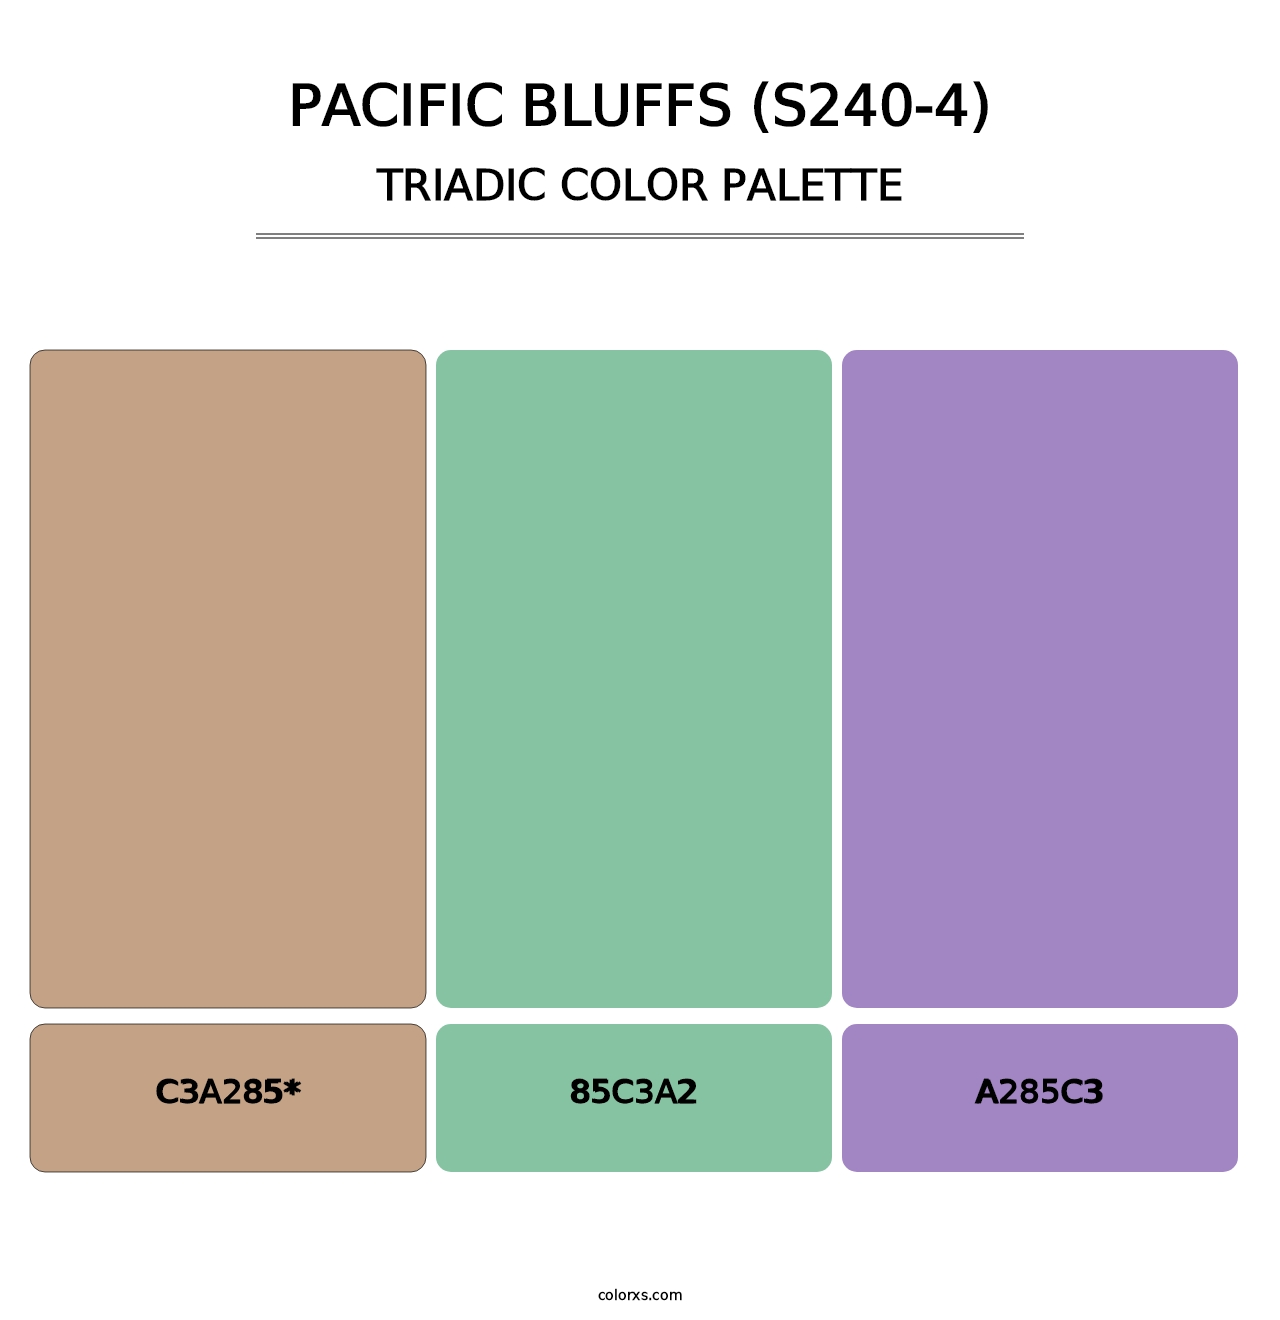 Pacific Bluffs (S240-4) - Triadic Color Palette